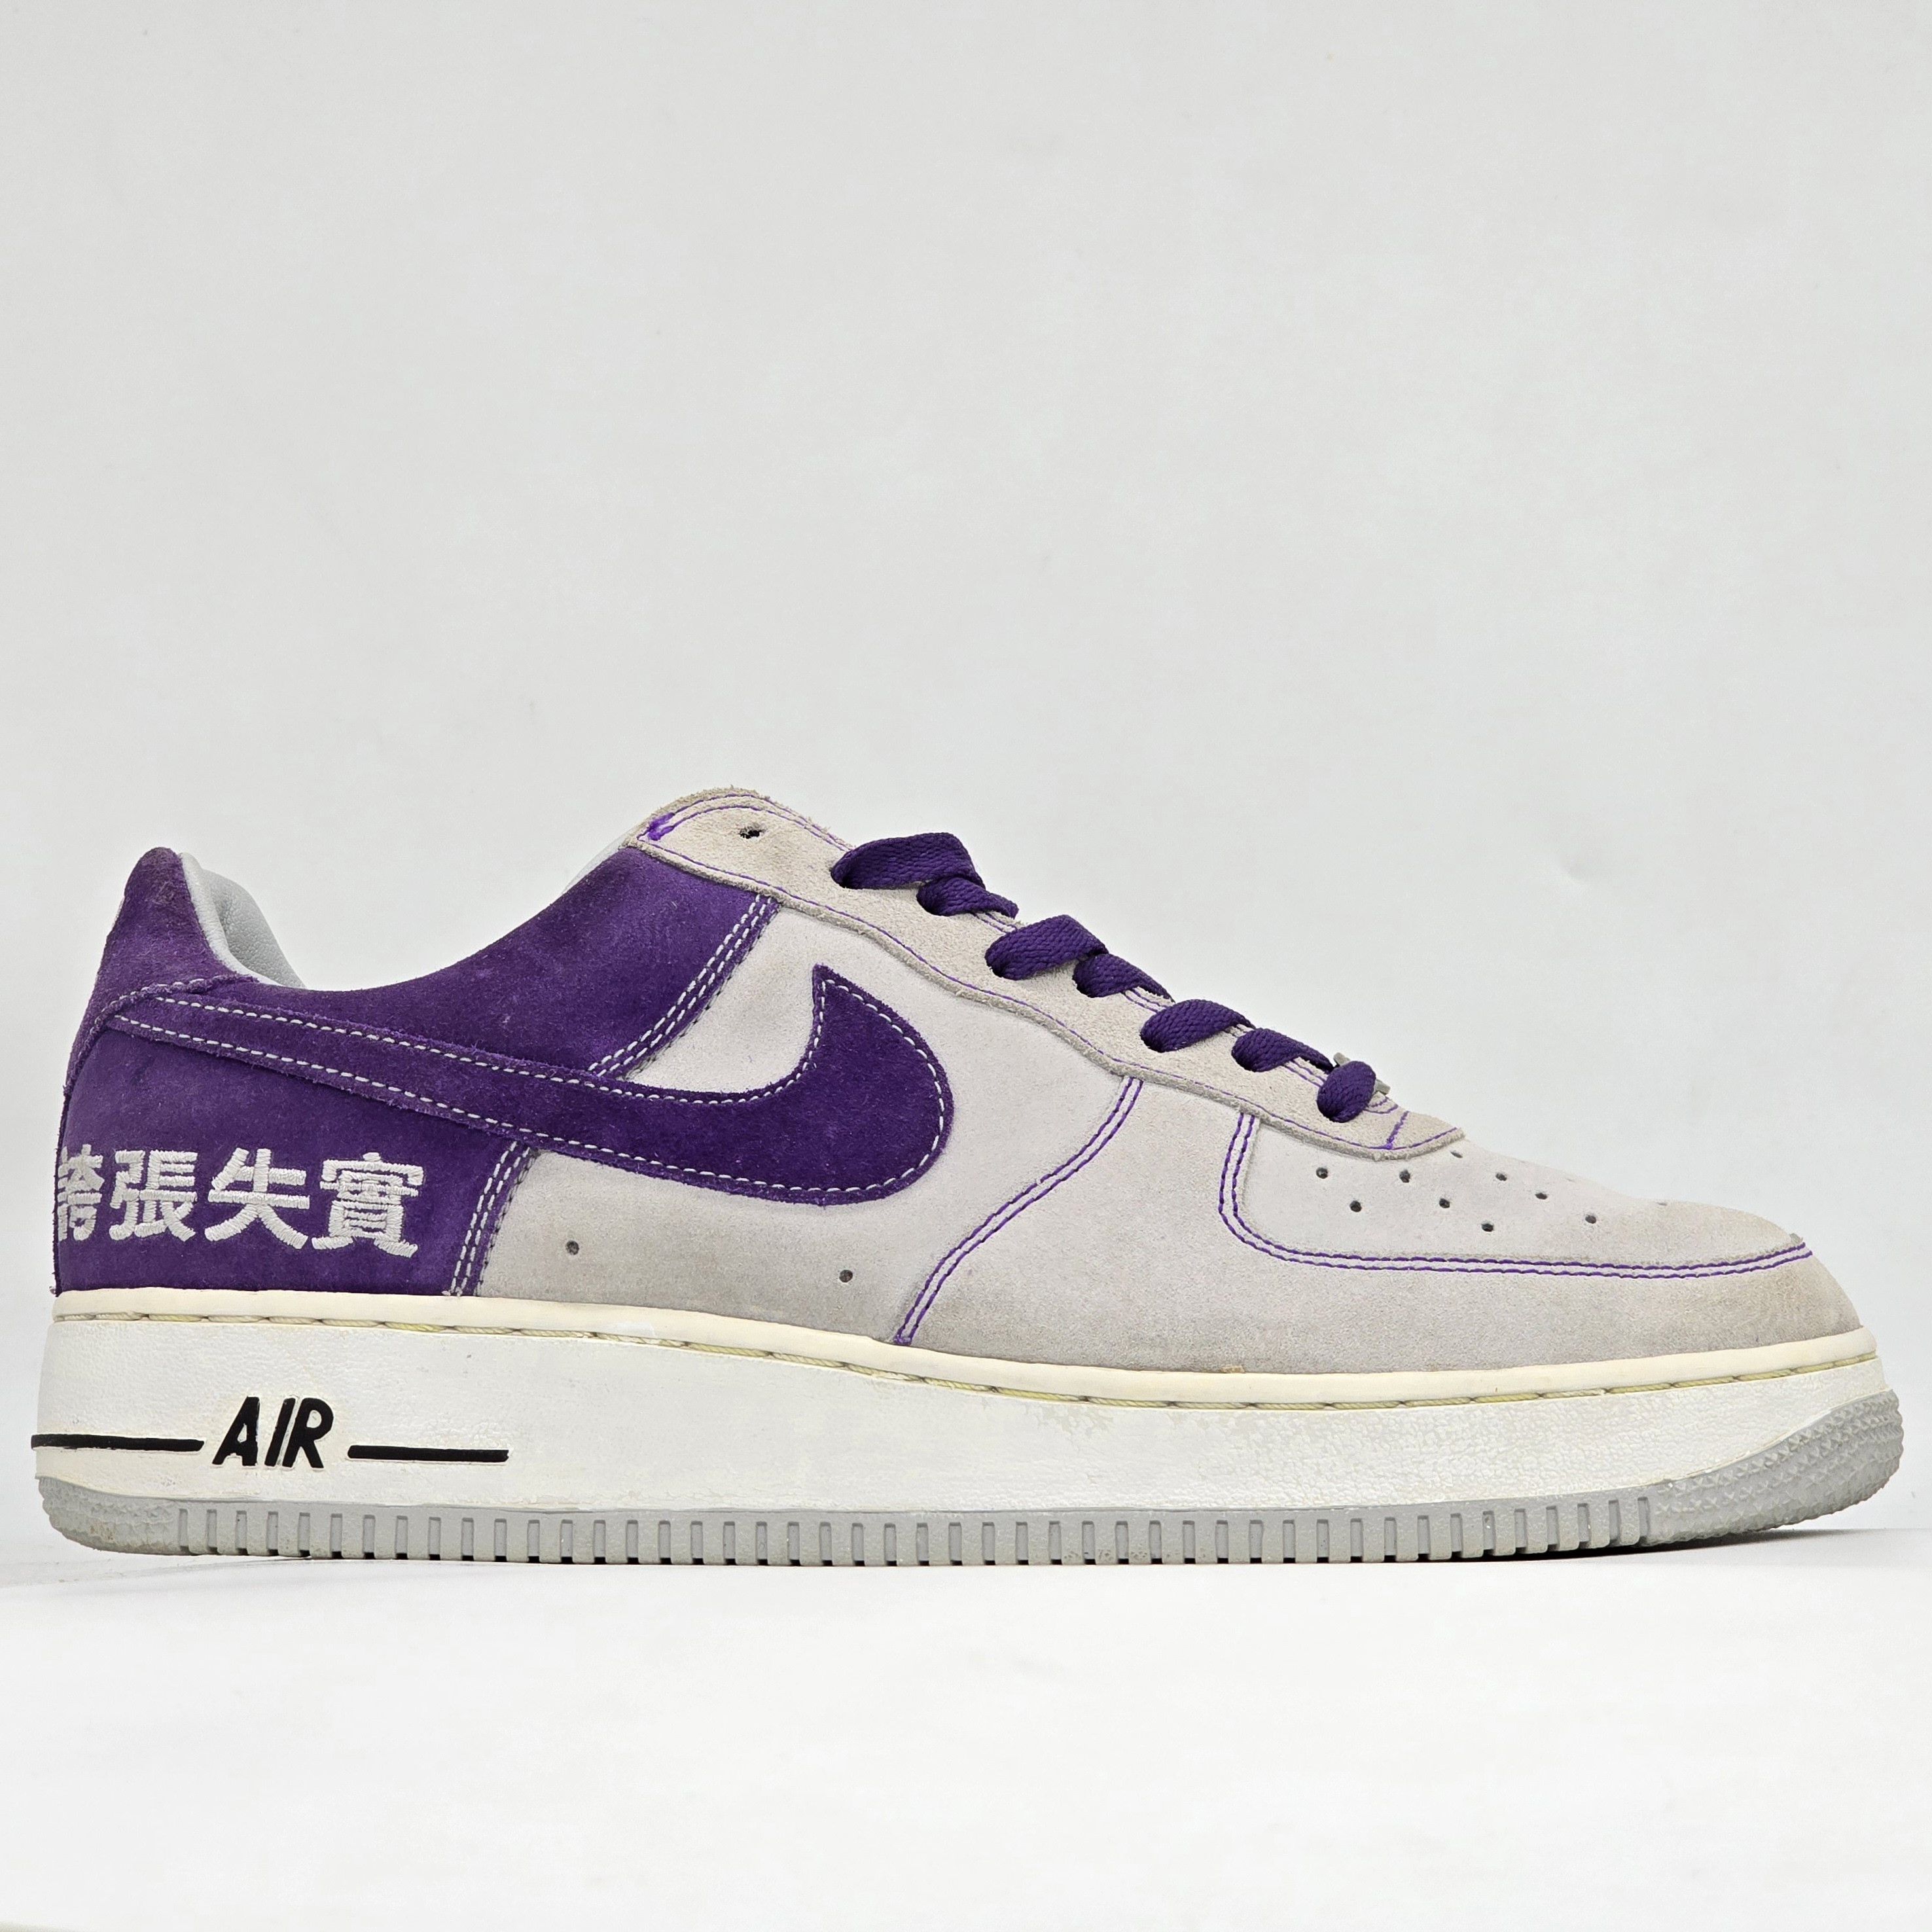 Nike - 2005 Airforce 1 Chamber of Fear "Hype" - 1